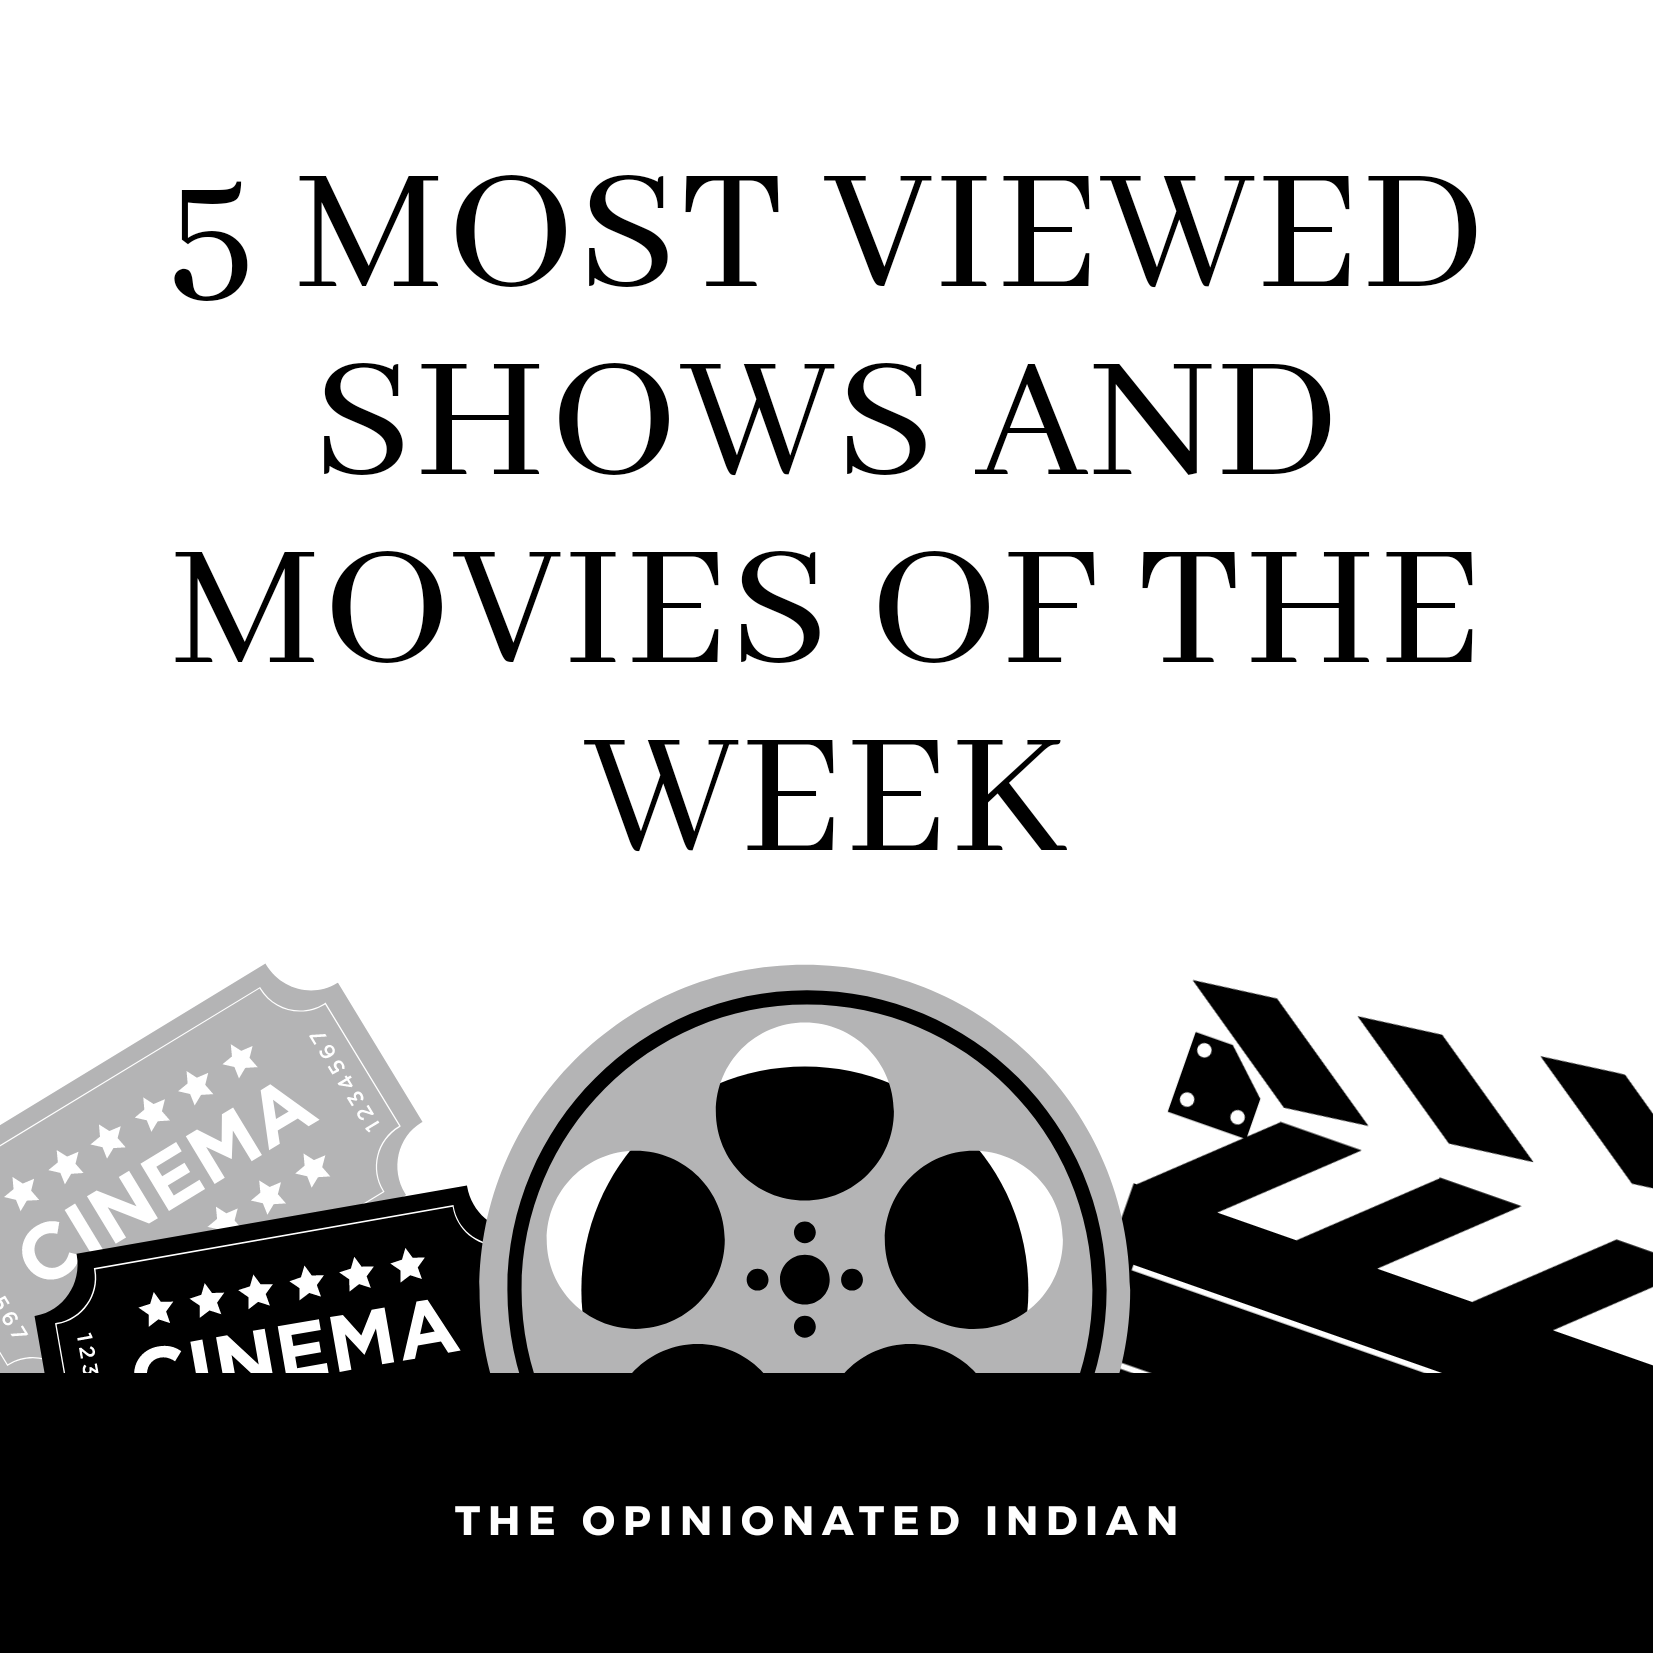 5 Most Viewed Shows And Movies Of The Week